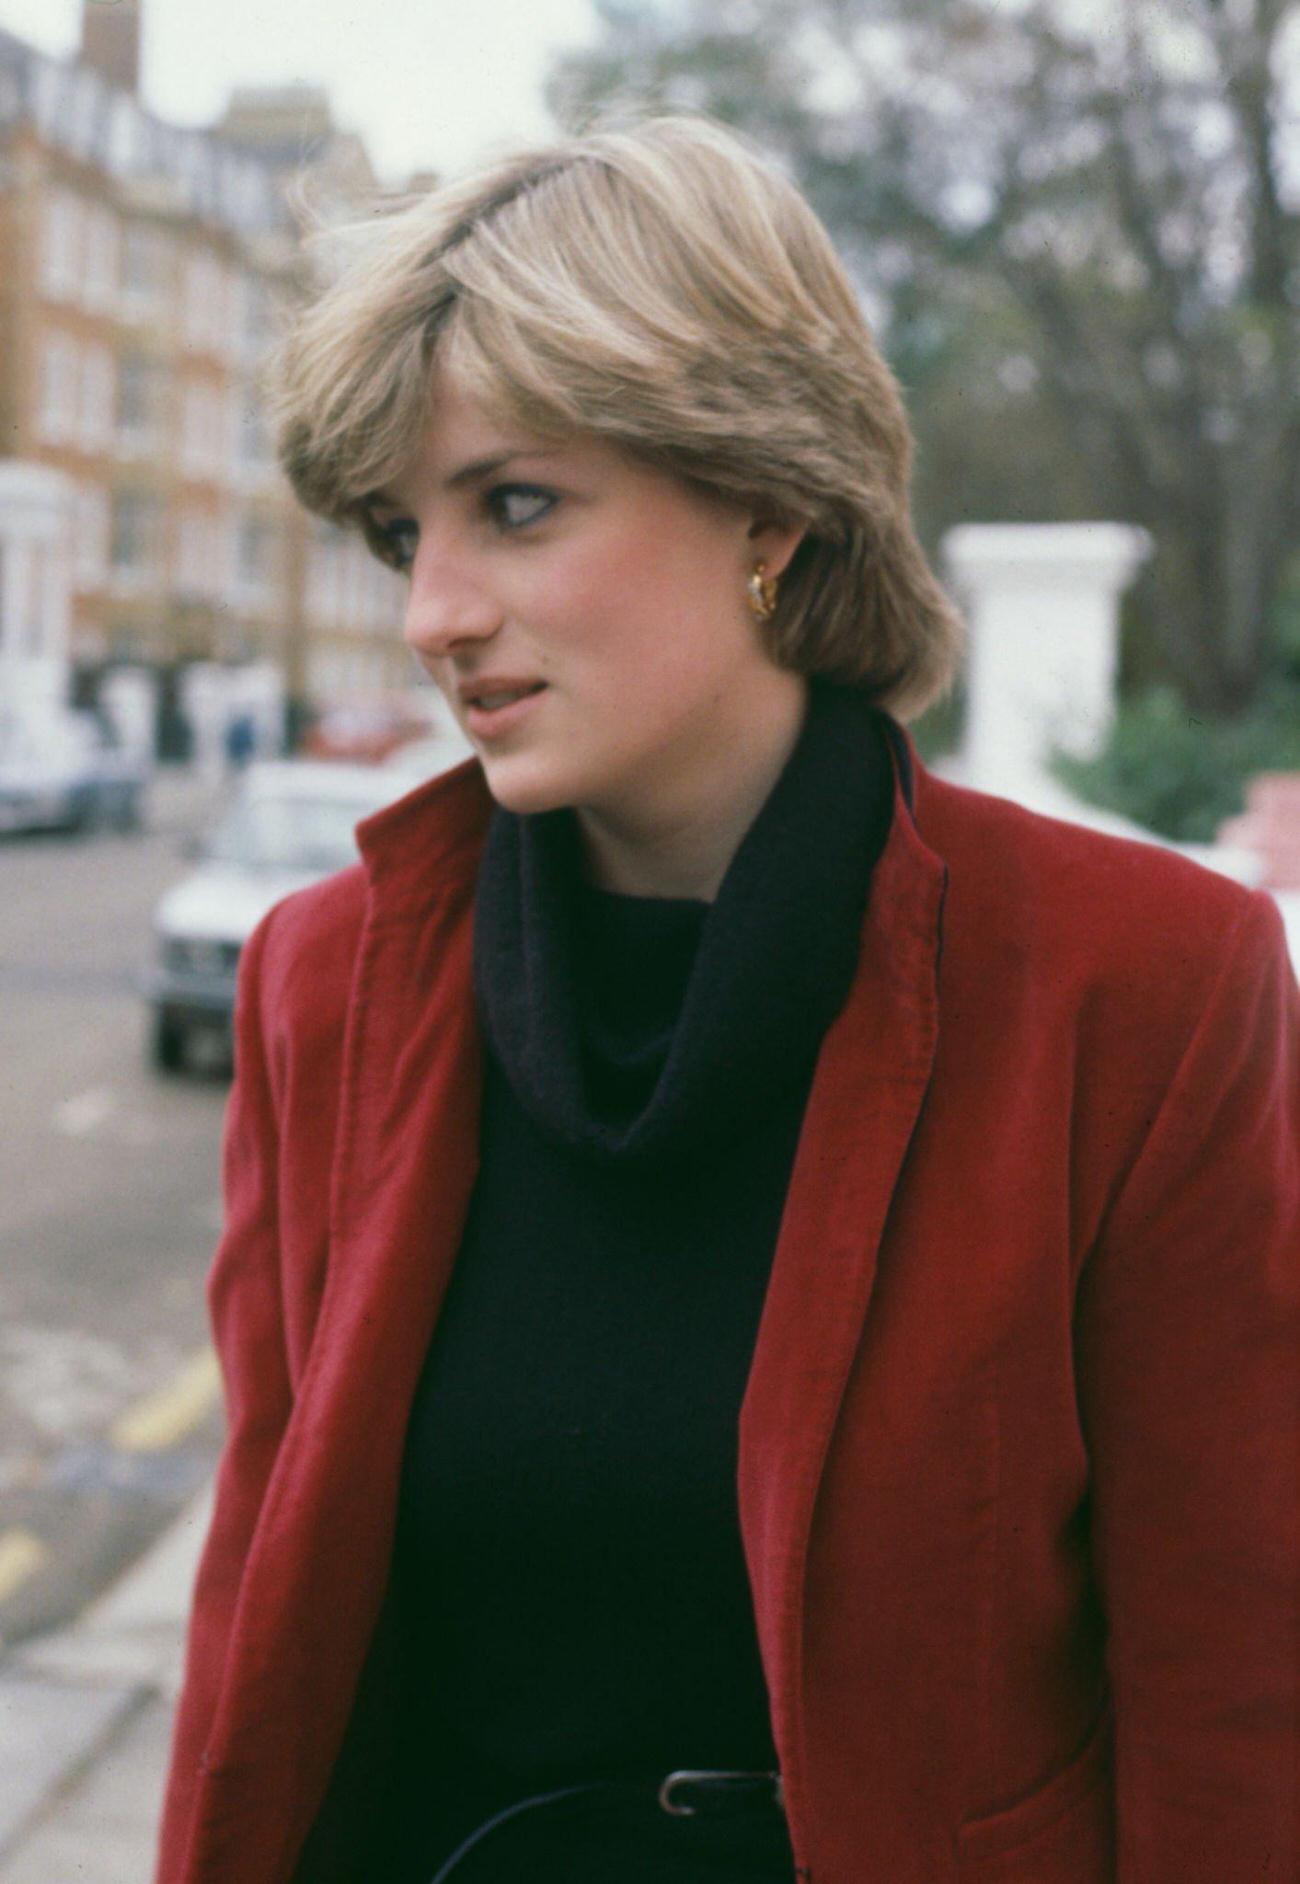 Diana, Princess of Wales, wearing a red jacket over a black sweater, outside her home in Earl's Court, London, 1980